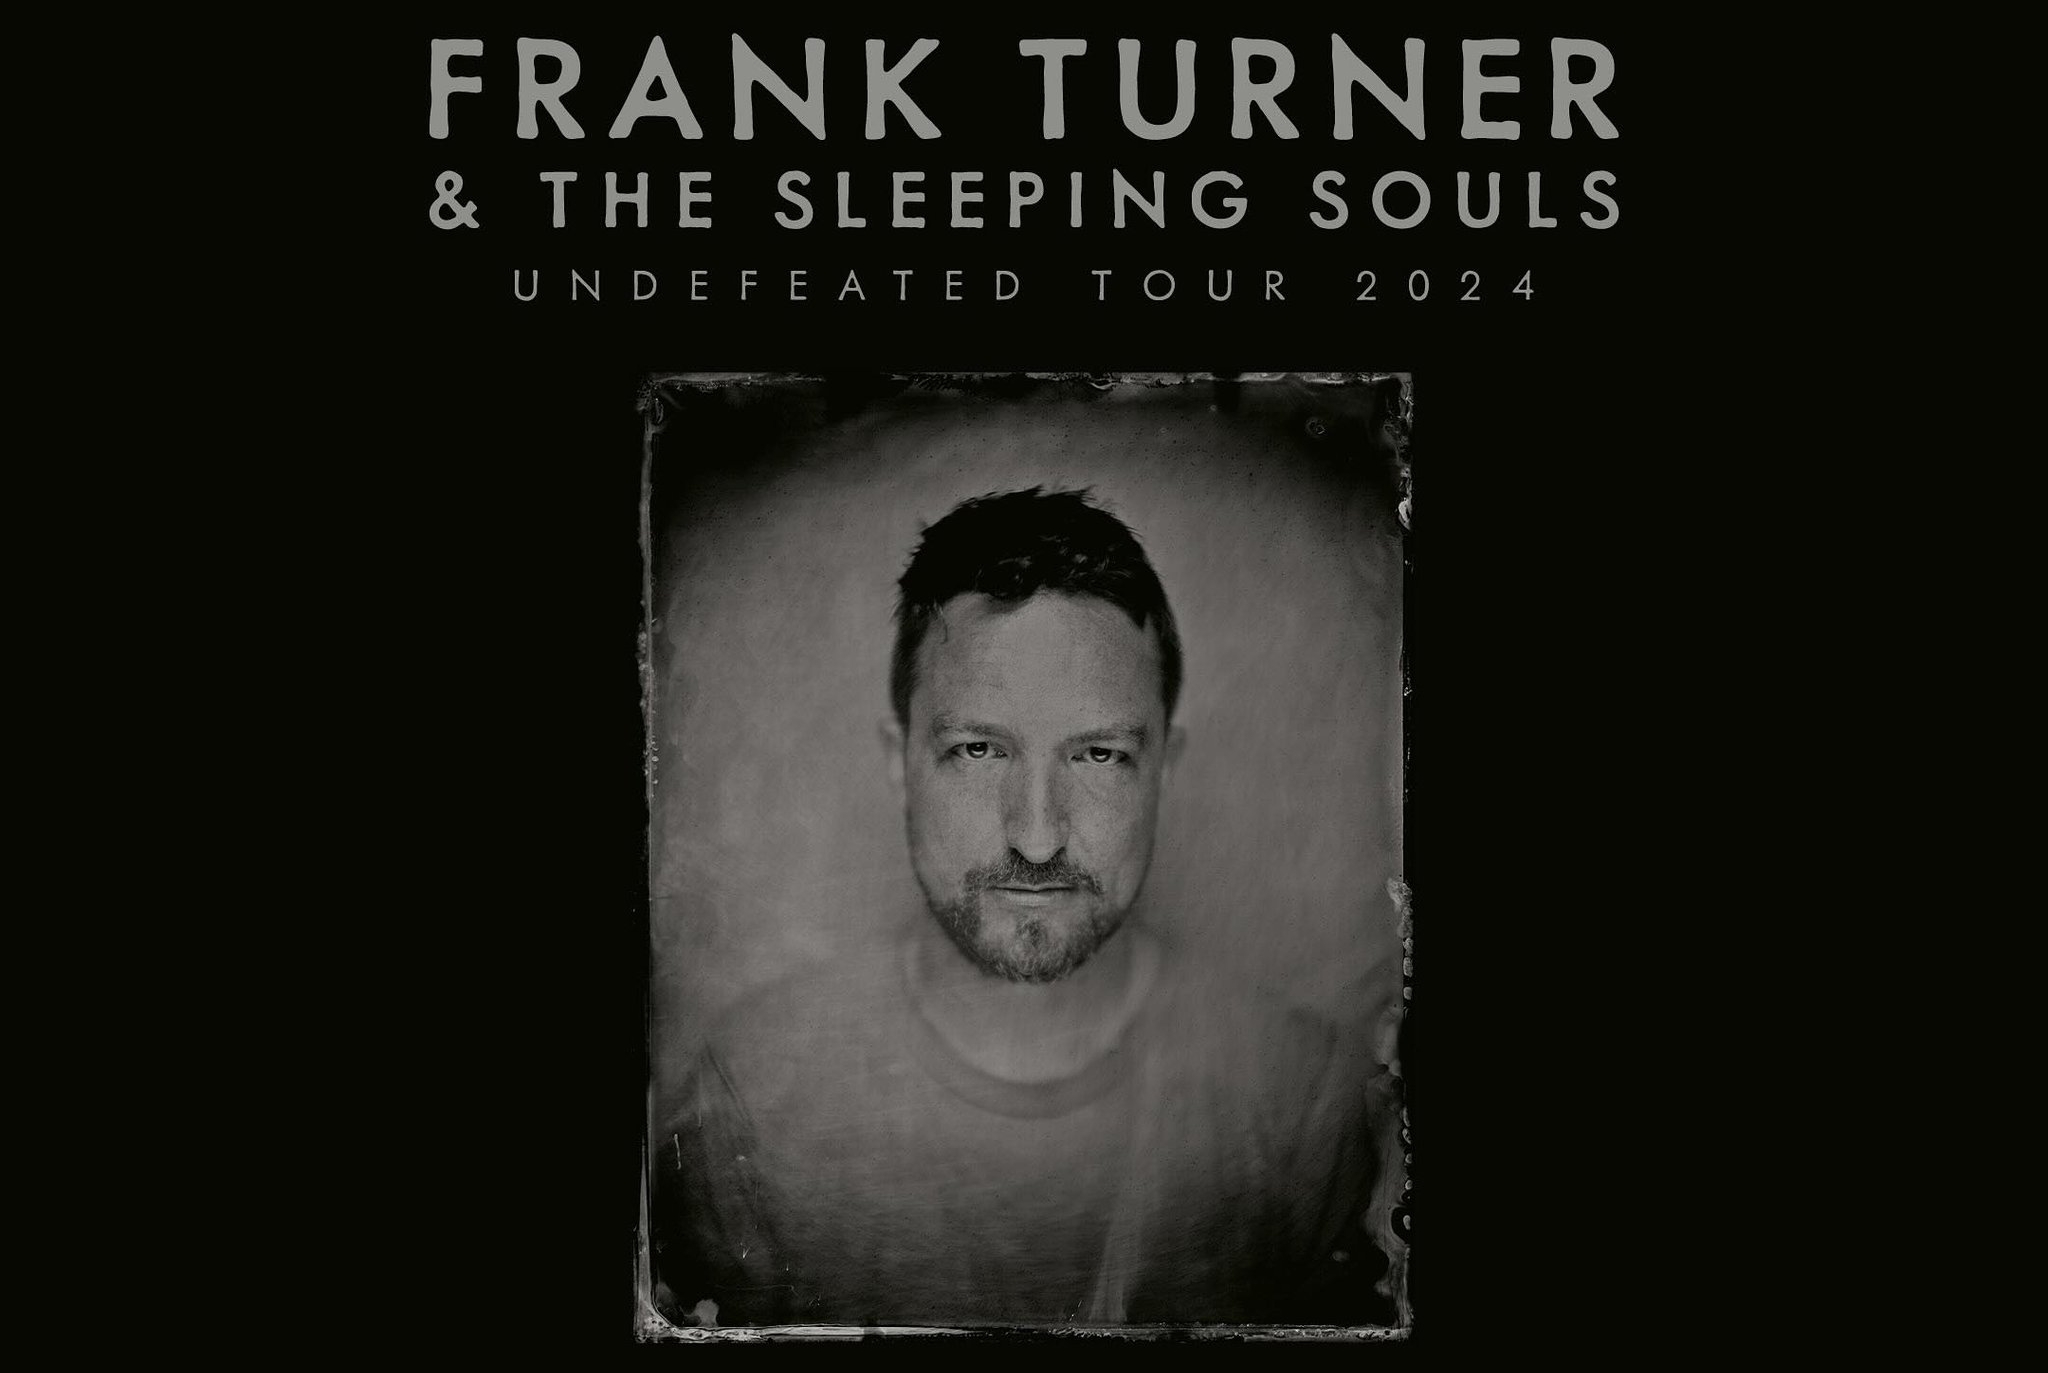 Frank Turner and The Sleeping Souls at Sporthalle Hamburg Tickets